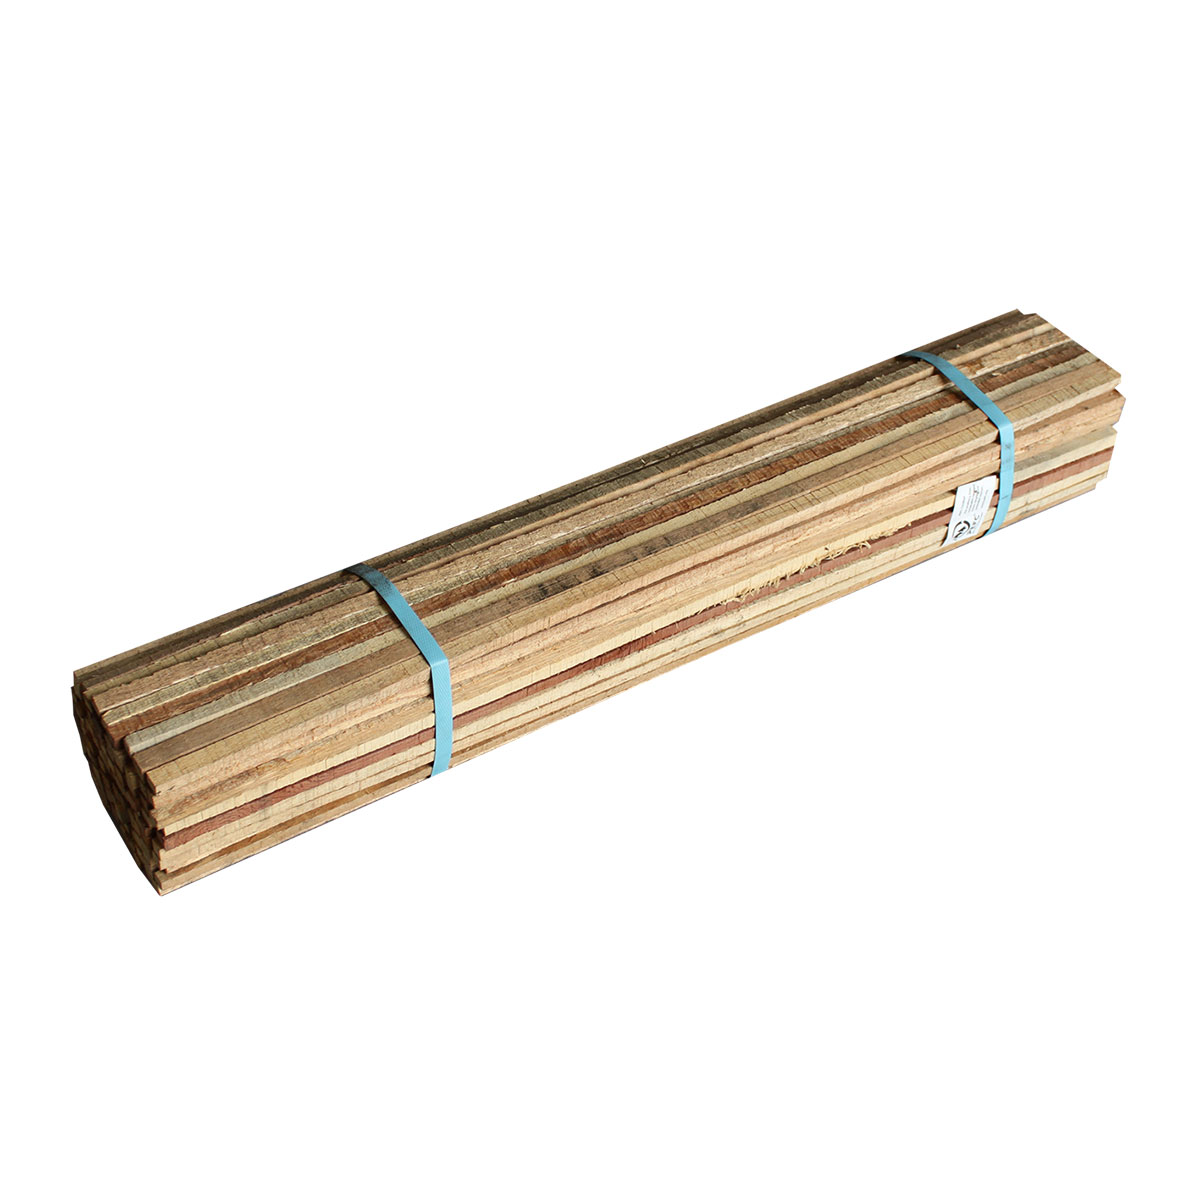 Hardwood Stakes 12 x 12 x 600mm - 100 Pack